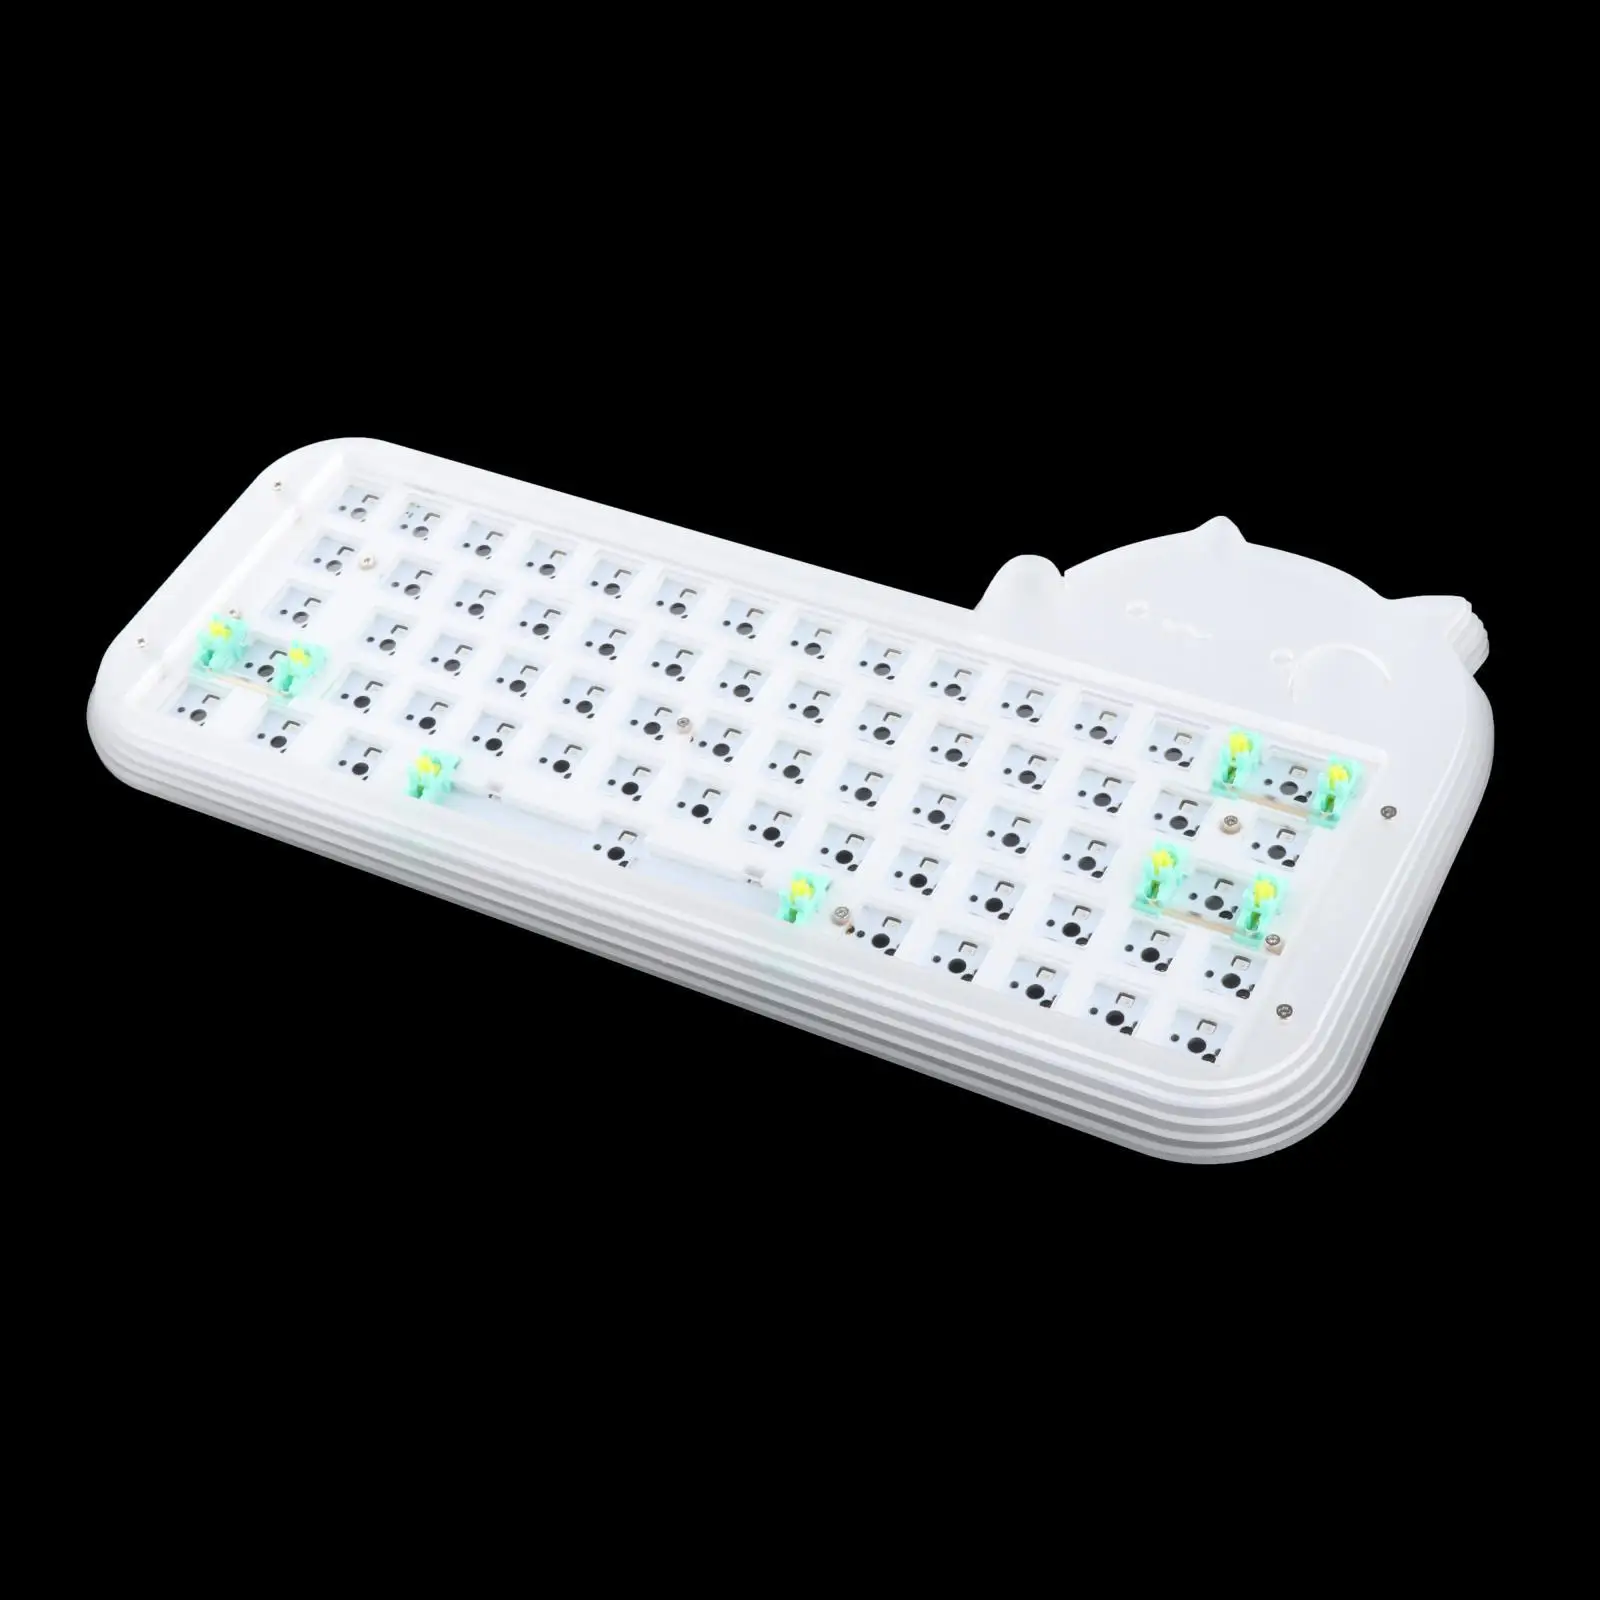 Mechanical Keyboard DIY Kit Hot Swap Switches RGB LED Backlighting 65% Modular 64 Keys Wired Mounting Plate for Computer Windows